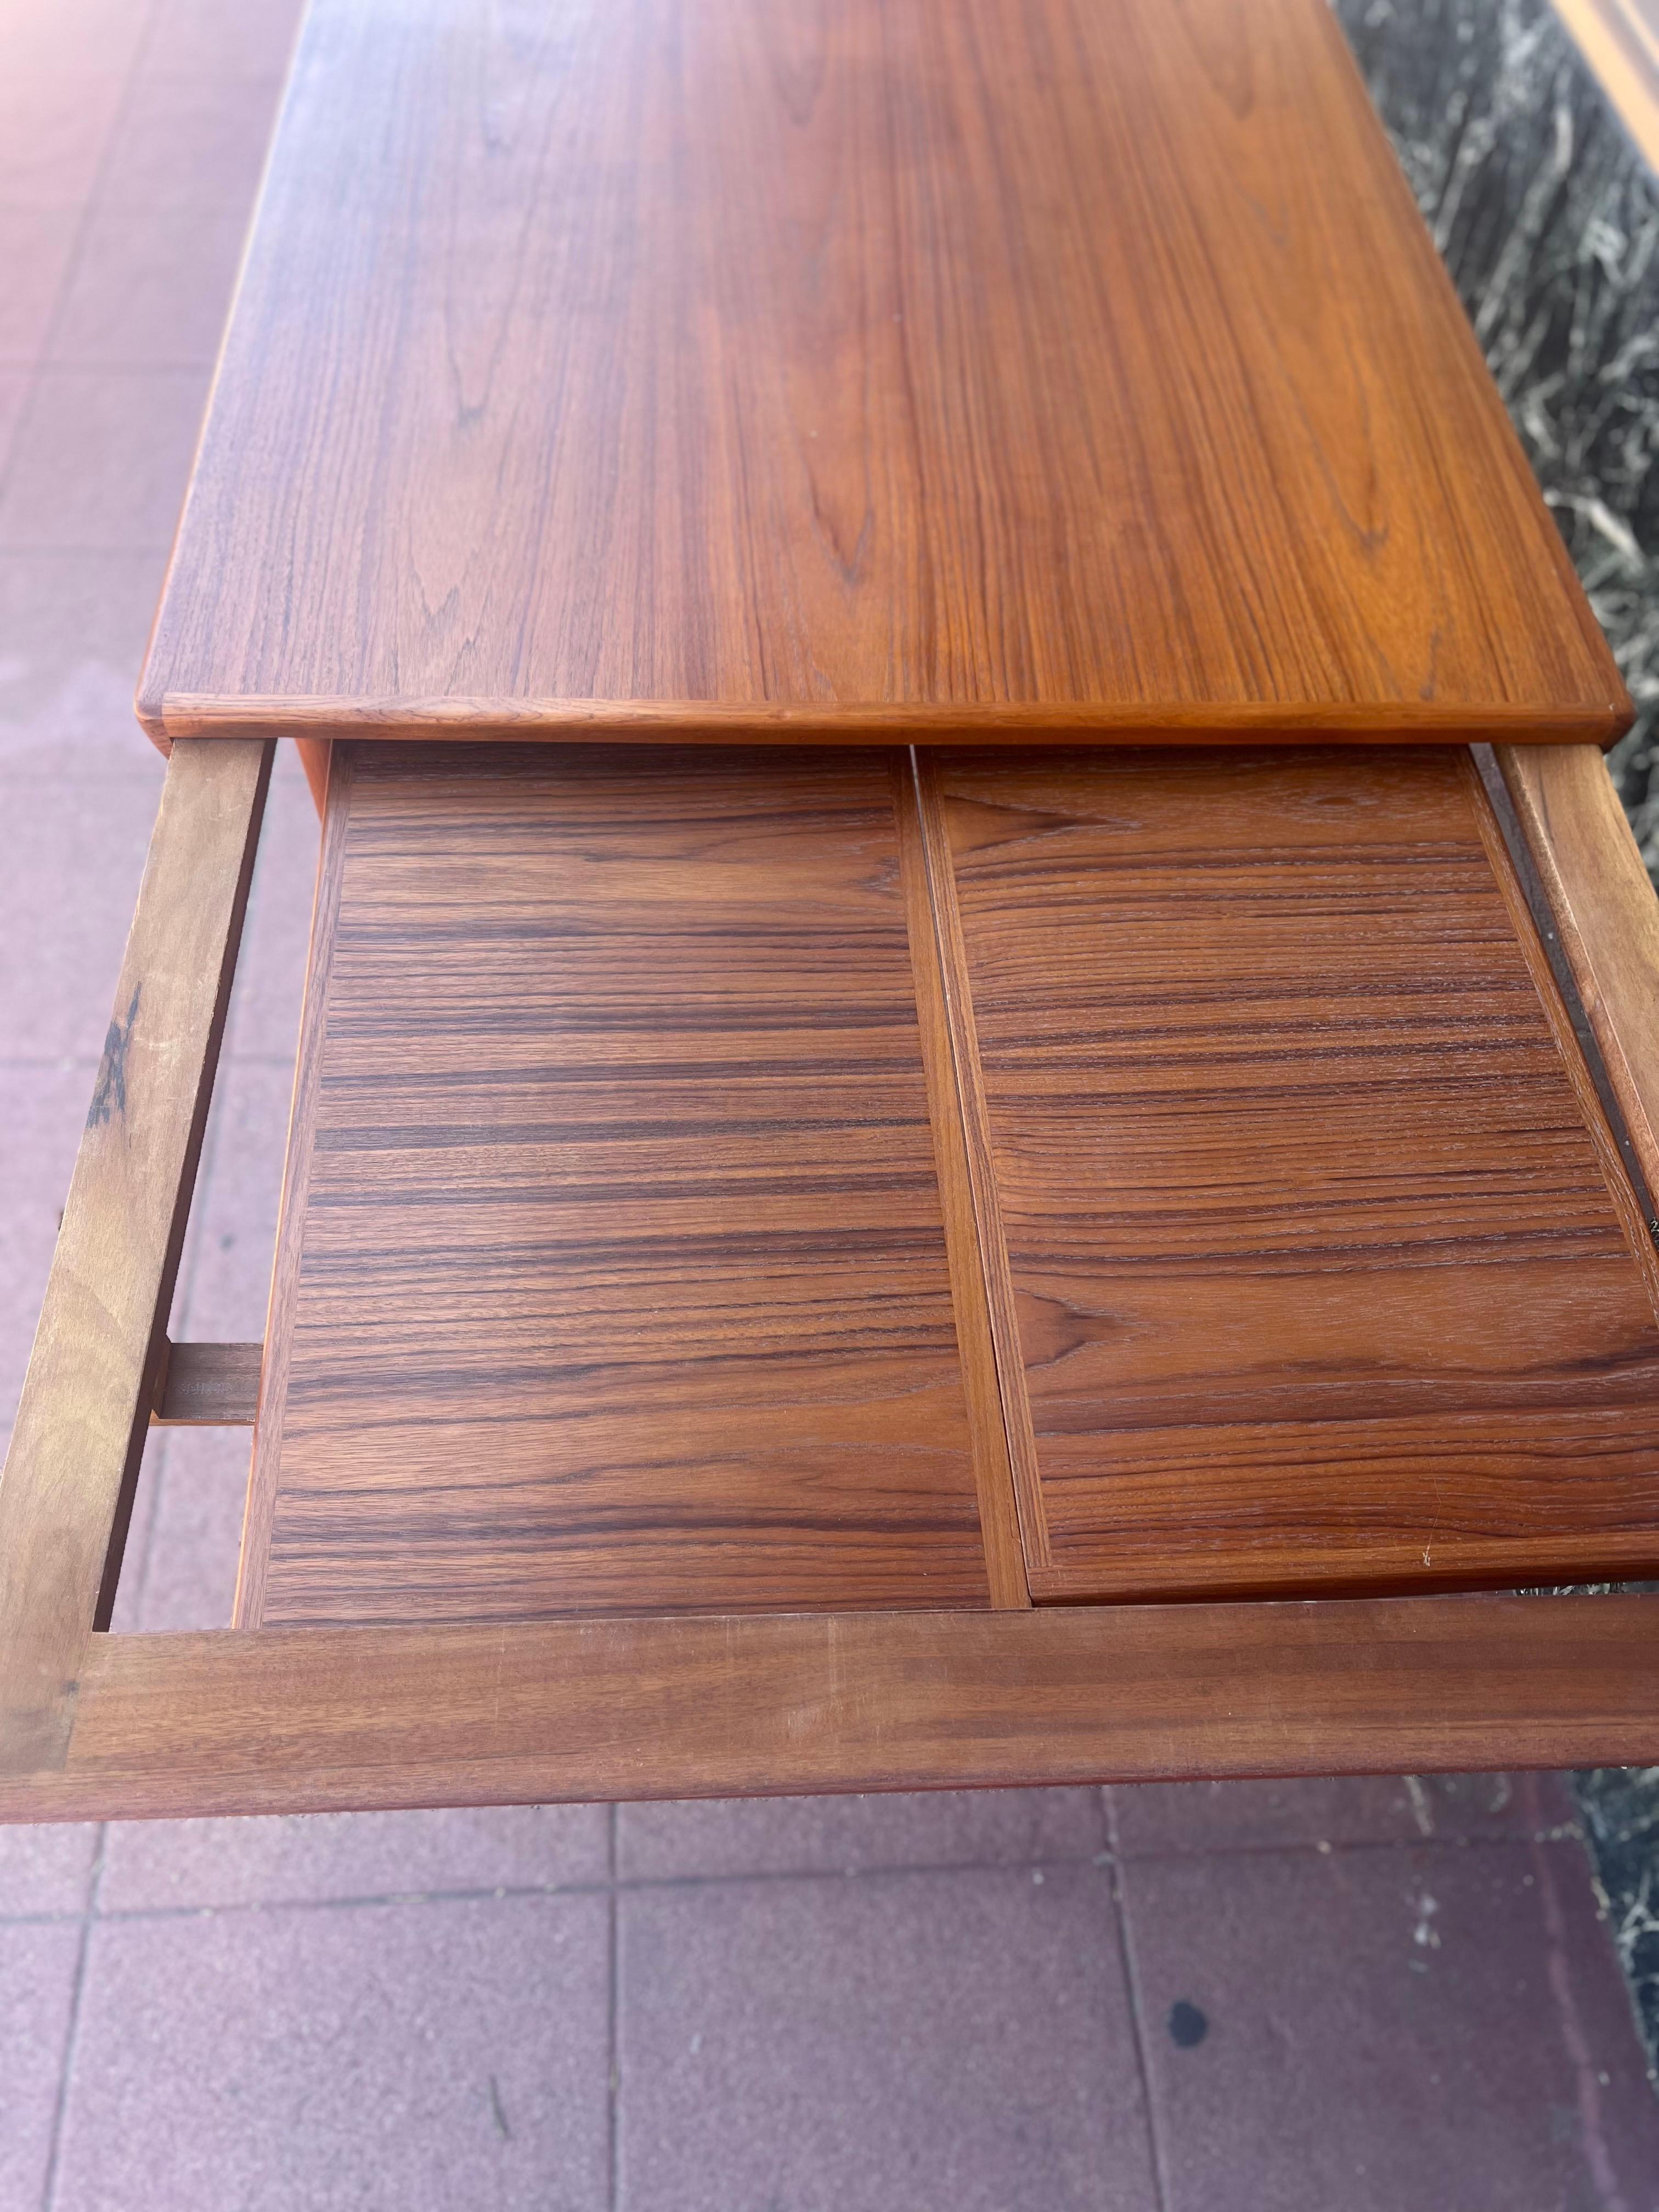 Danish Modern Teak Dining Table With 2 Pull-out Leaves by Johannes Andersen For Sale 3